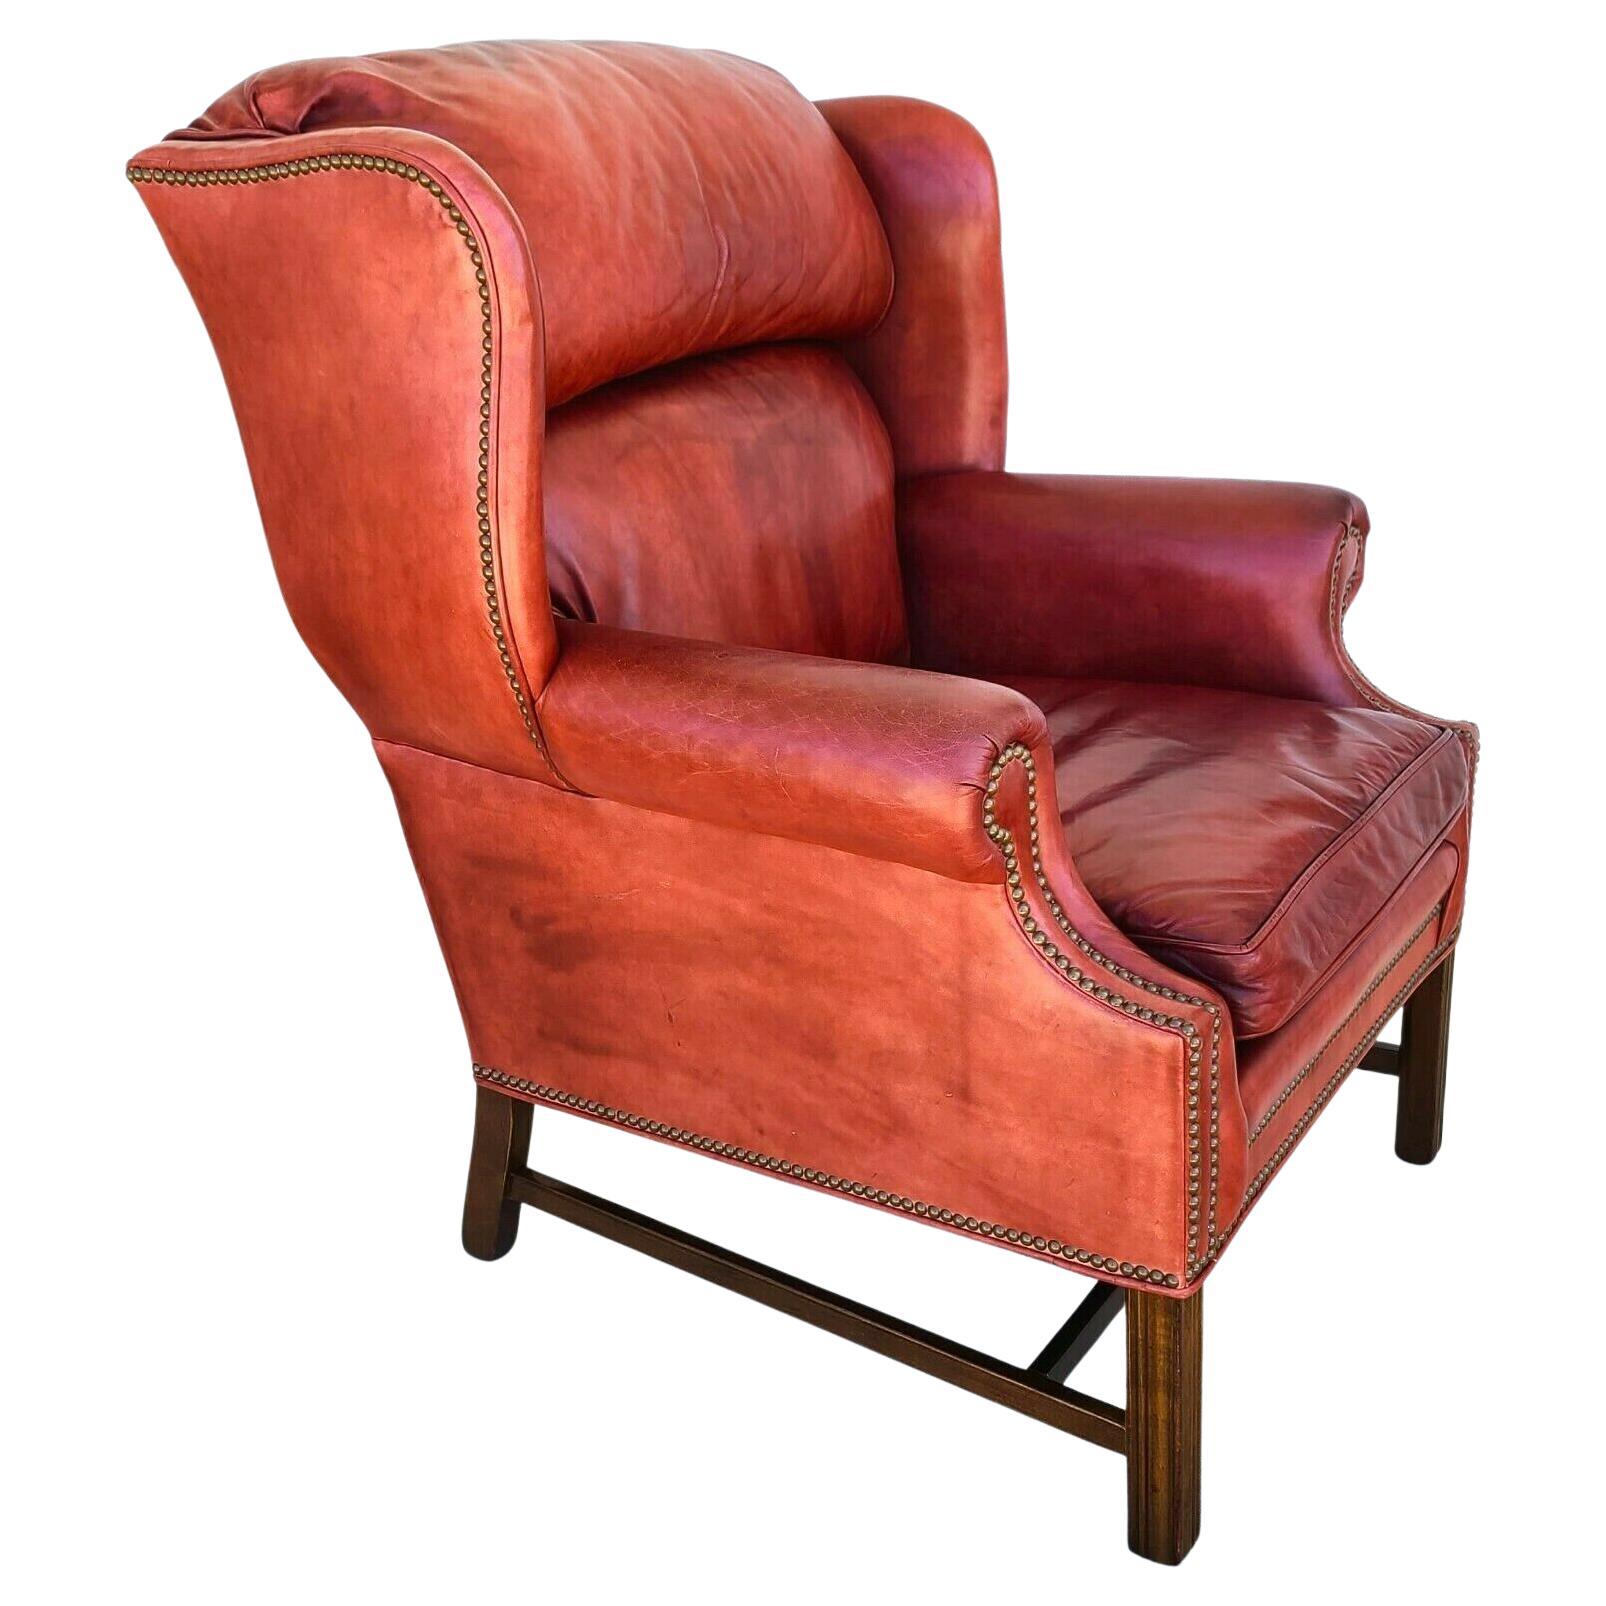 Chippendale Wingback Red Leather Library Reading Chair by Ethan Allen